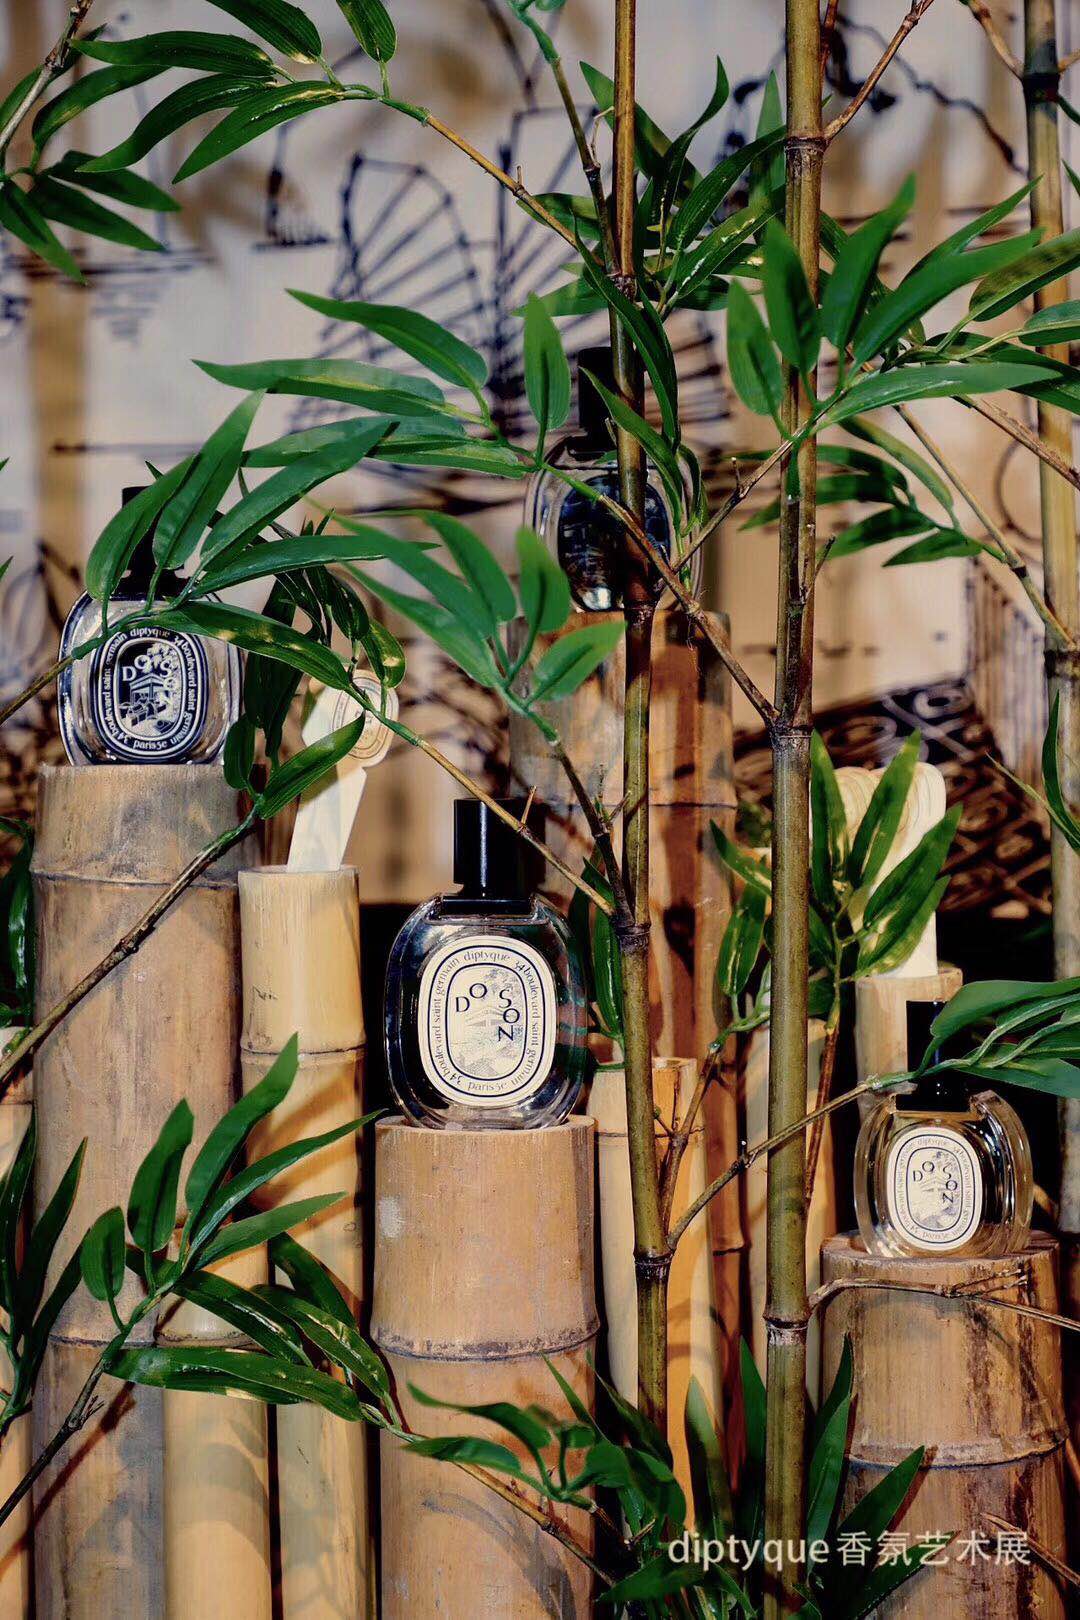 Diptyque 50Y Anniversary Pop Up Store April 17th-28th Shanghai – 11